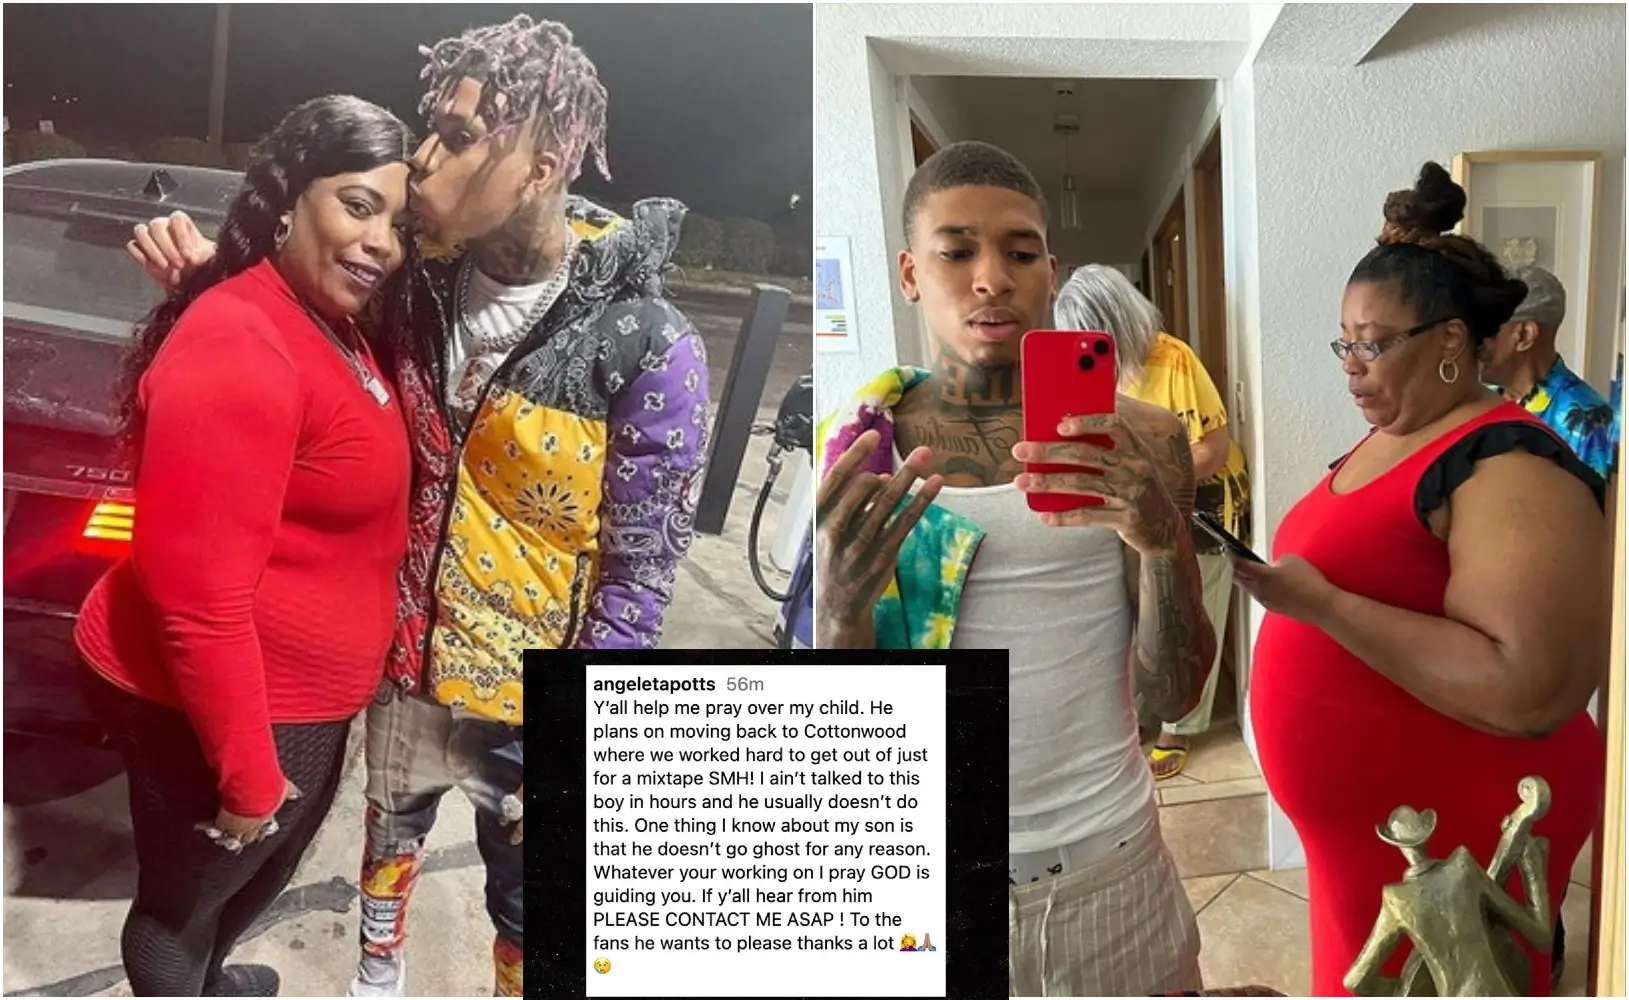 NLE Choppa's mom, concerned for his safety, pleads with fans to get in touch